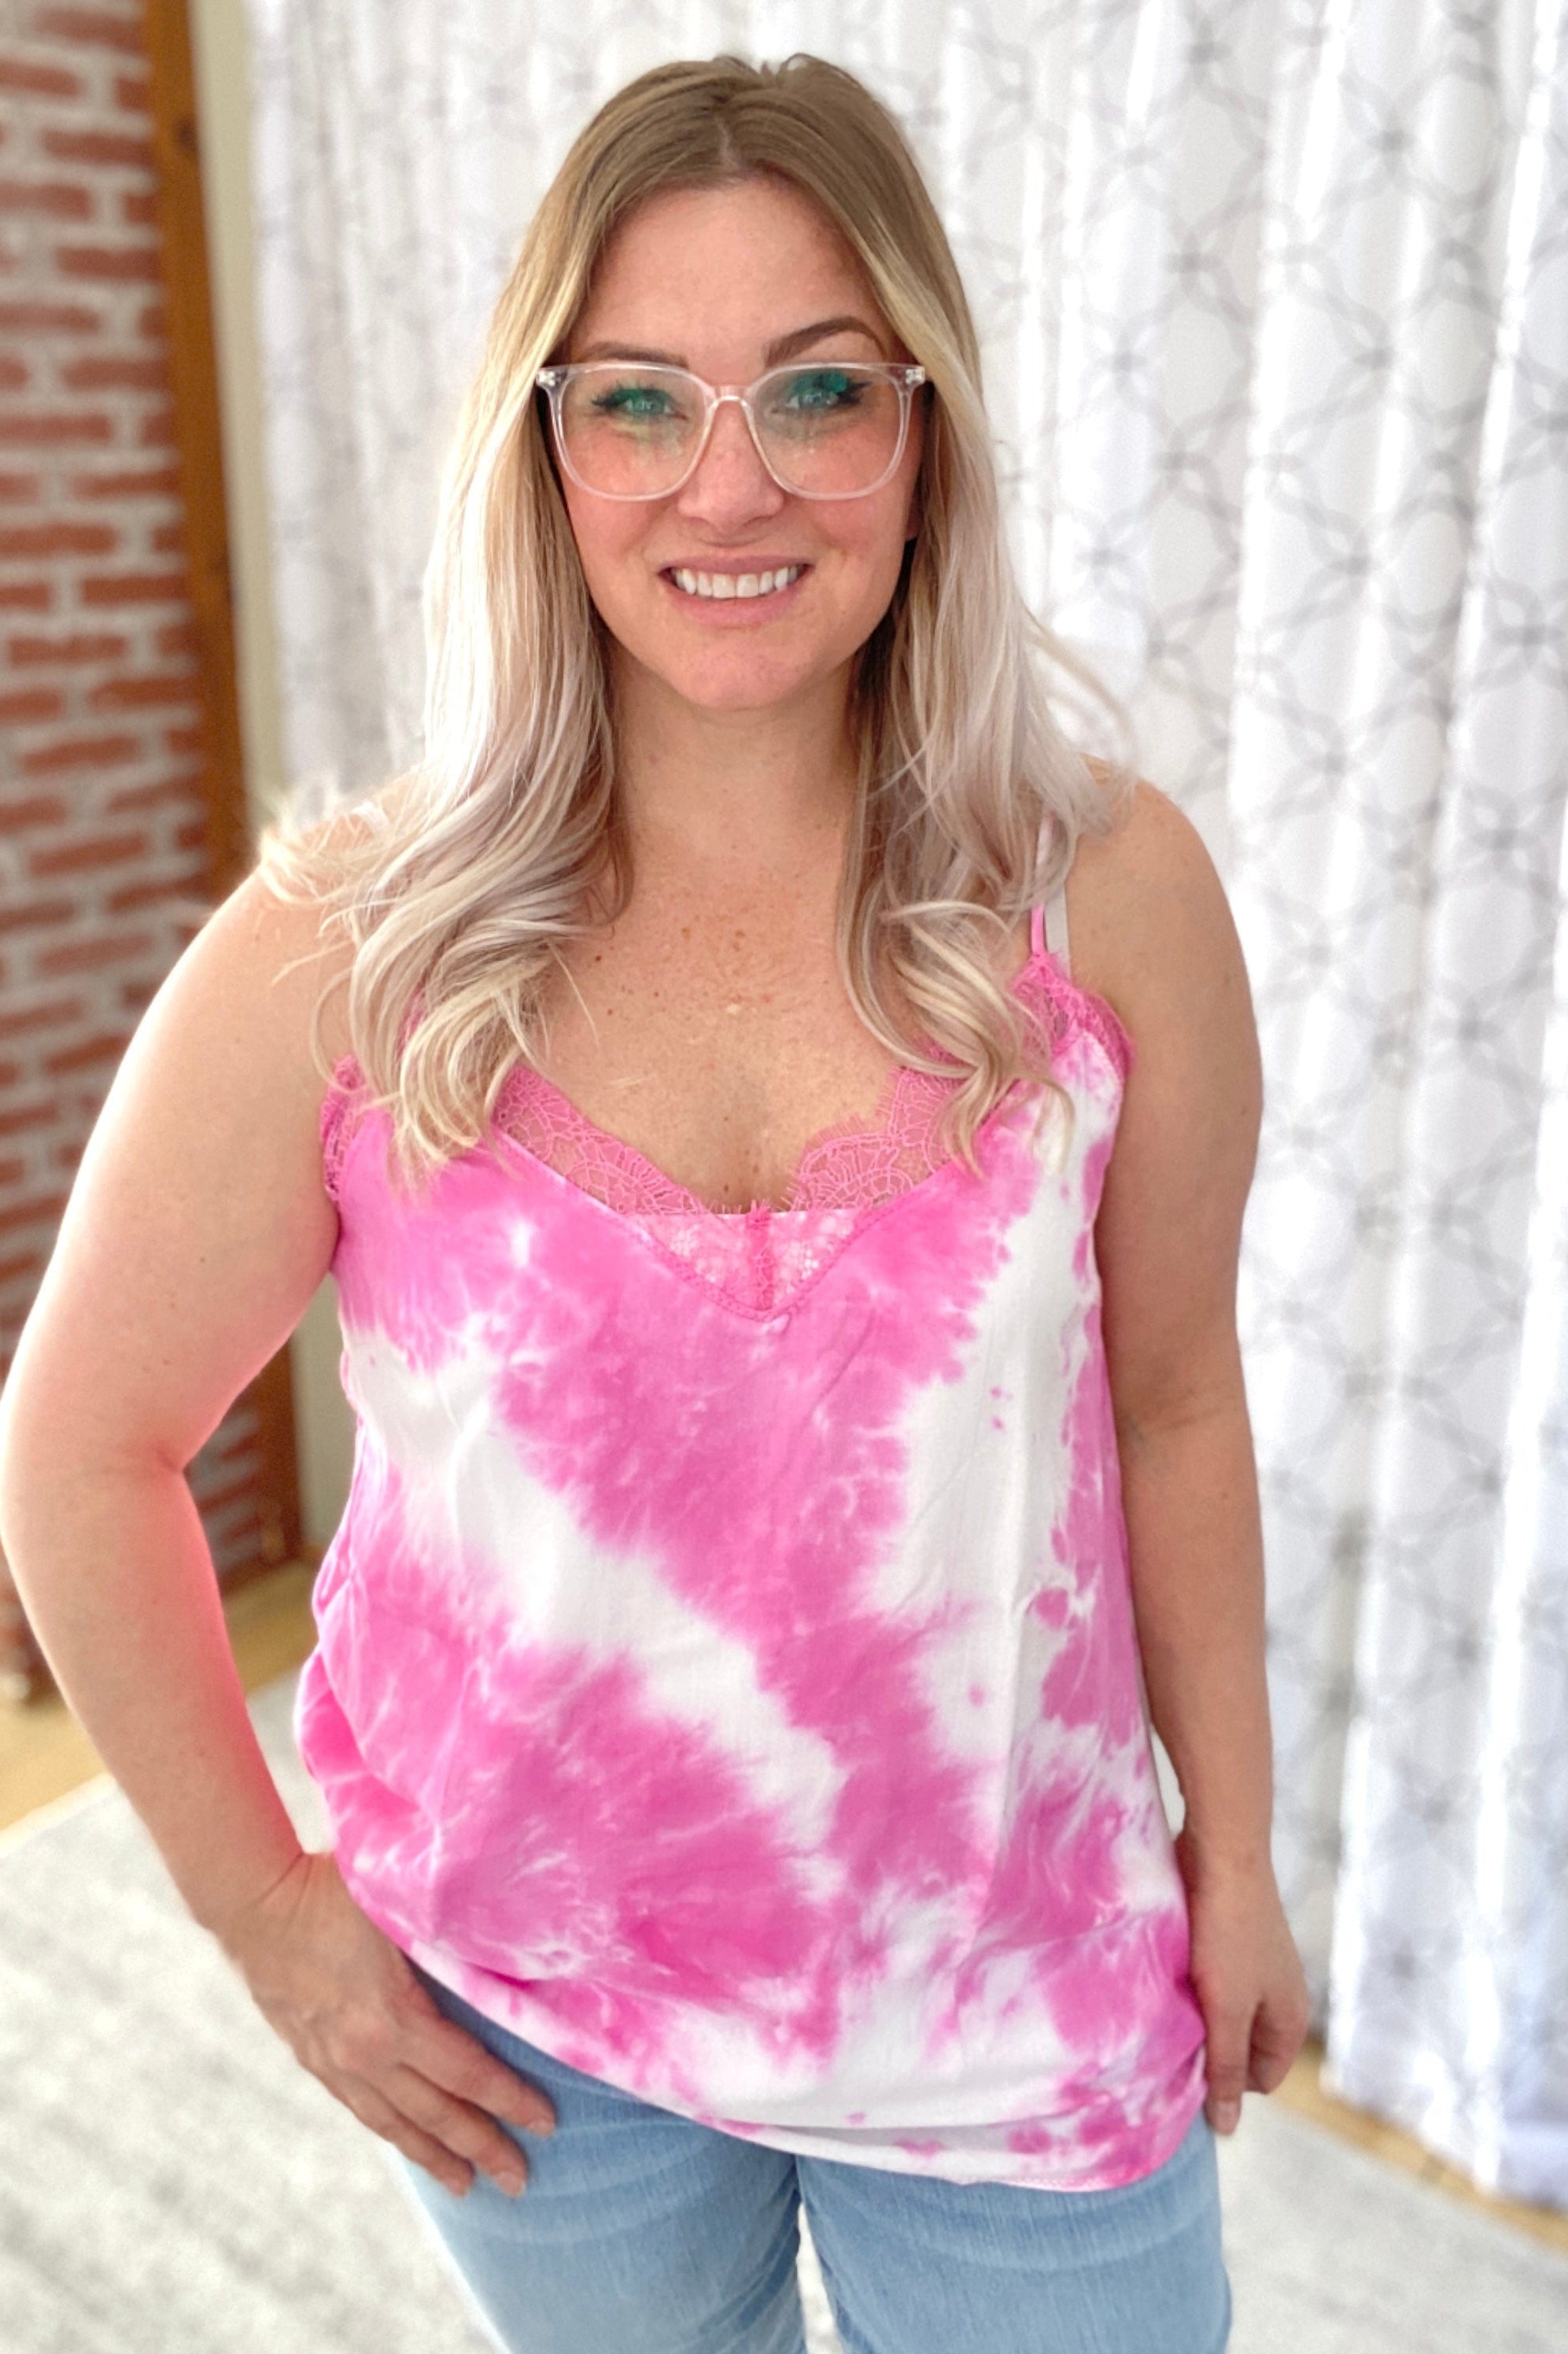 Love Into The Light Tank in Hot Pink-White Birch-Stay Foxy Boutique, Florissant, Missouri